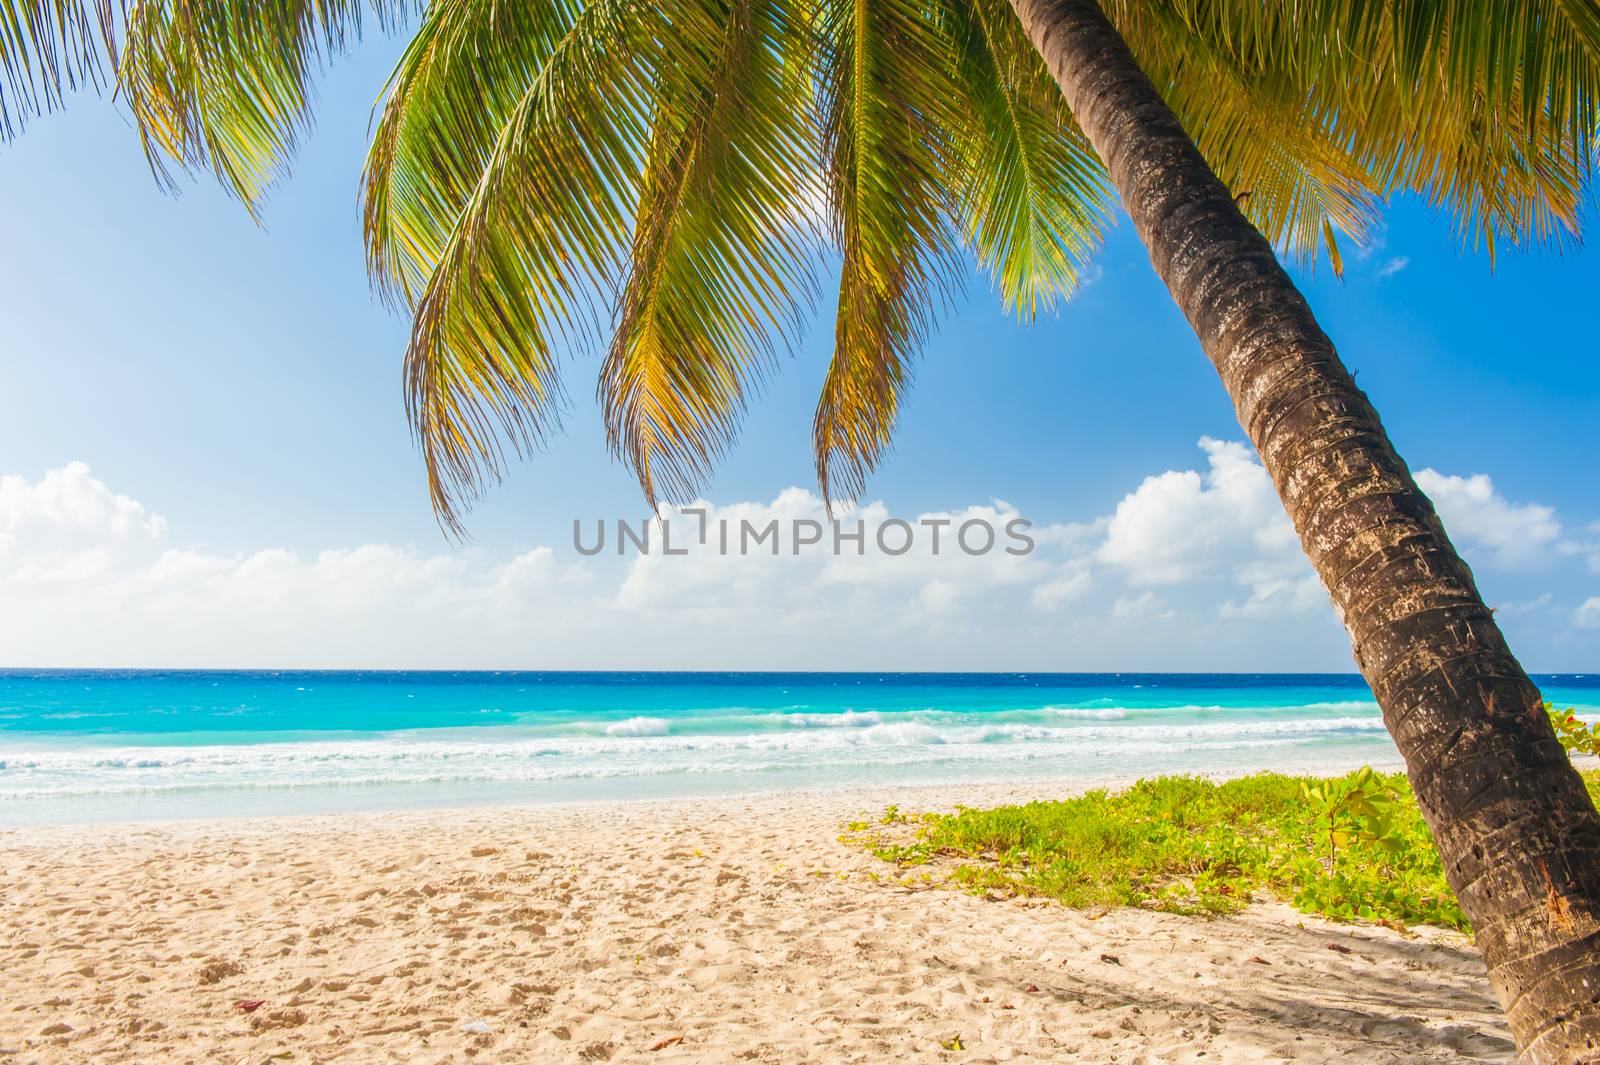 Palms on the white beach and a turquoise sea on a Caribbean island of Barbados